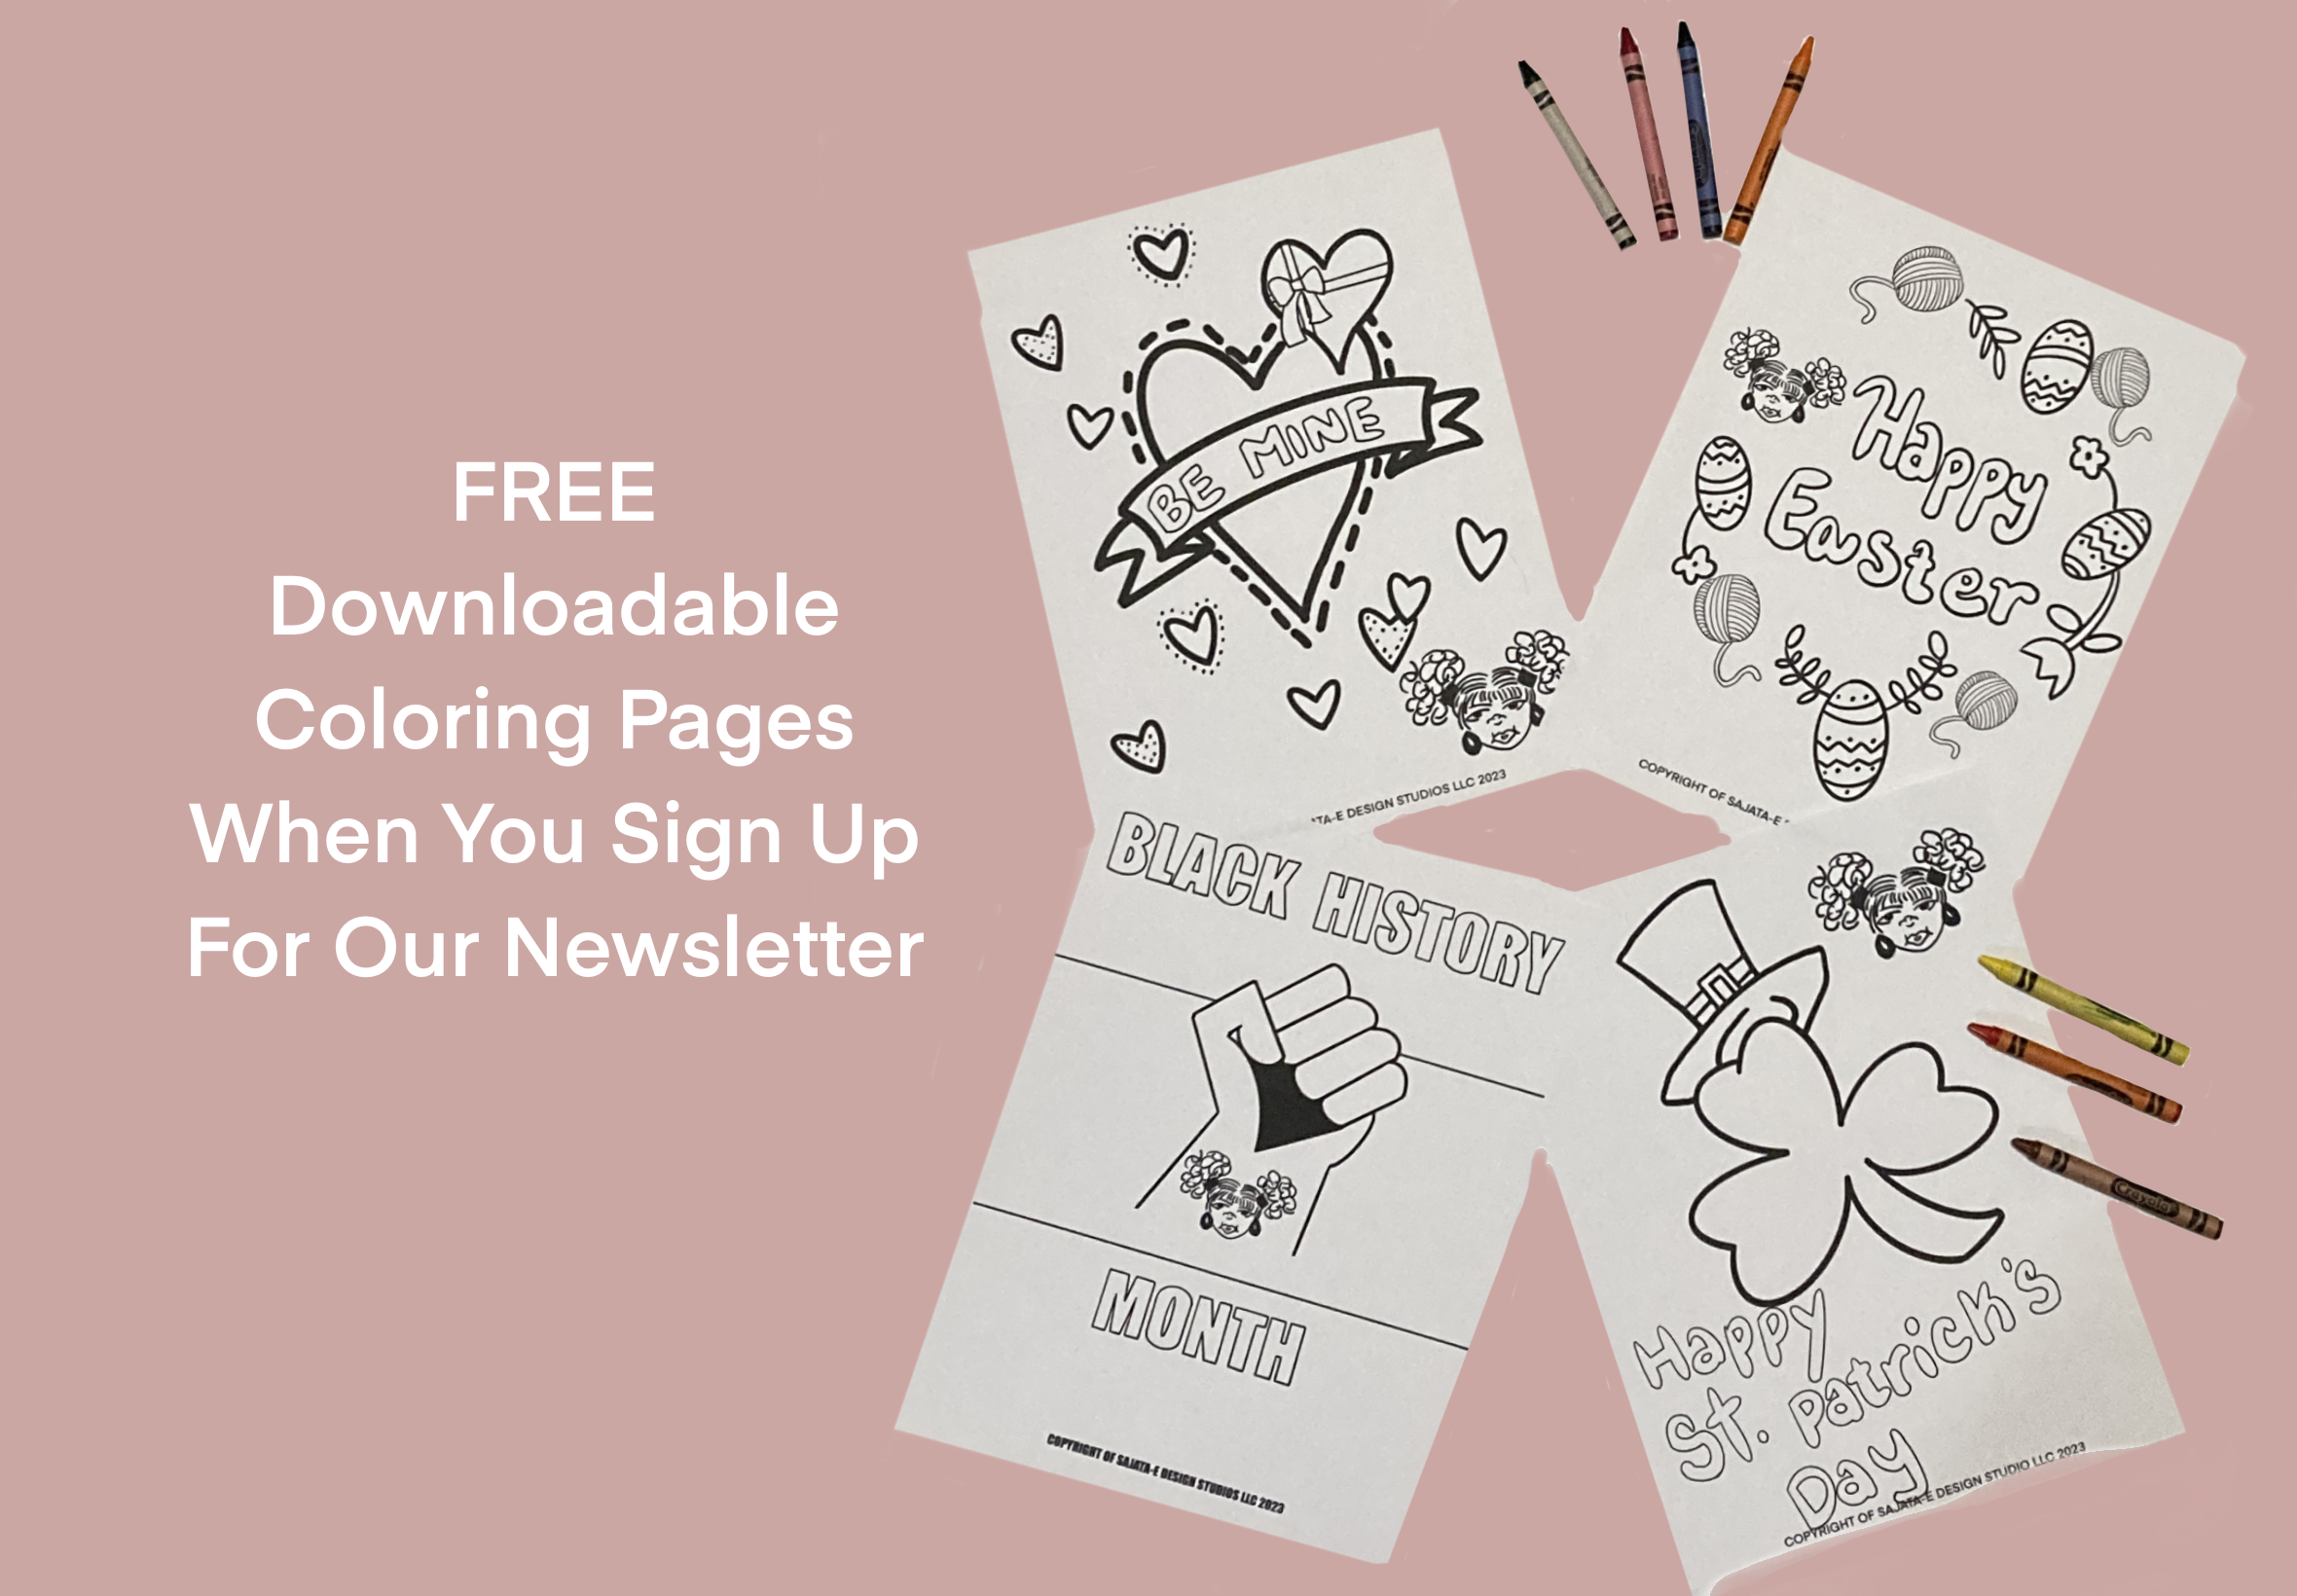 FREE Downloadable Coloring Pages when you sign up for our newsletter.